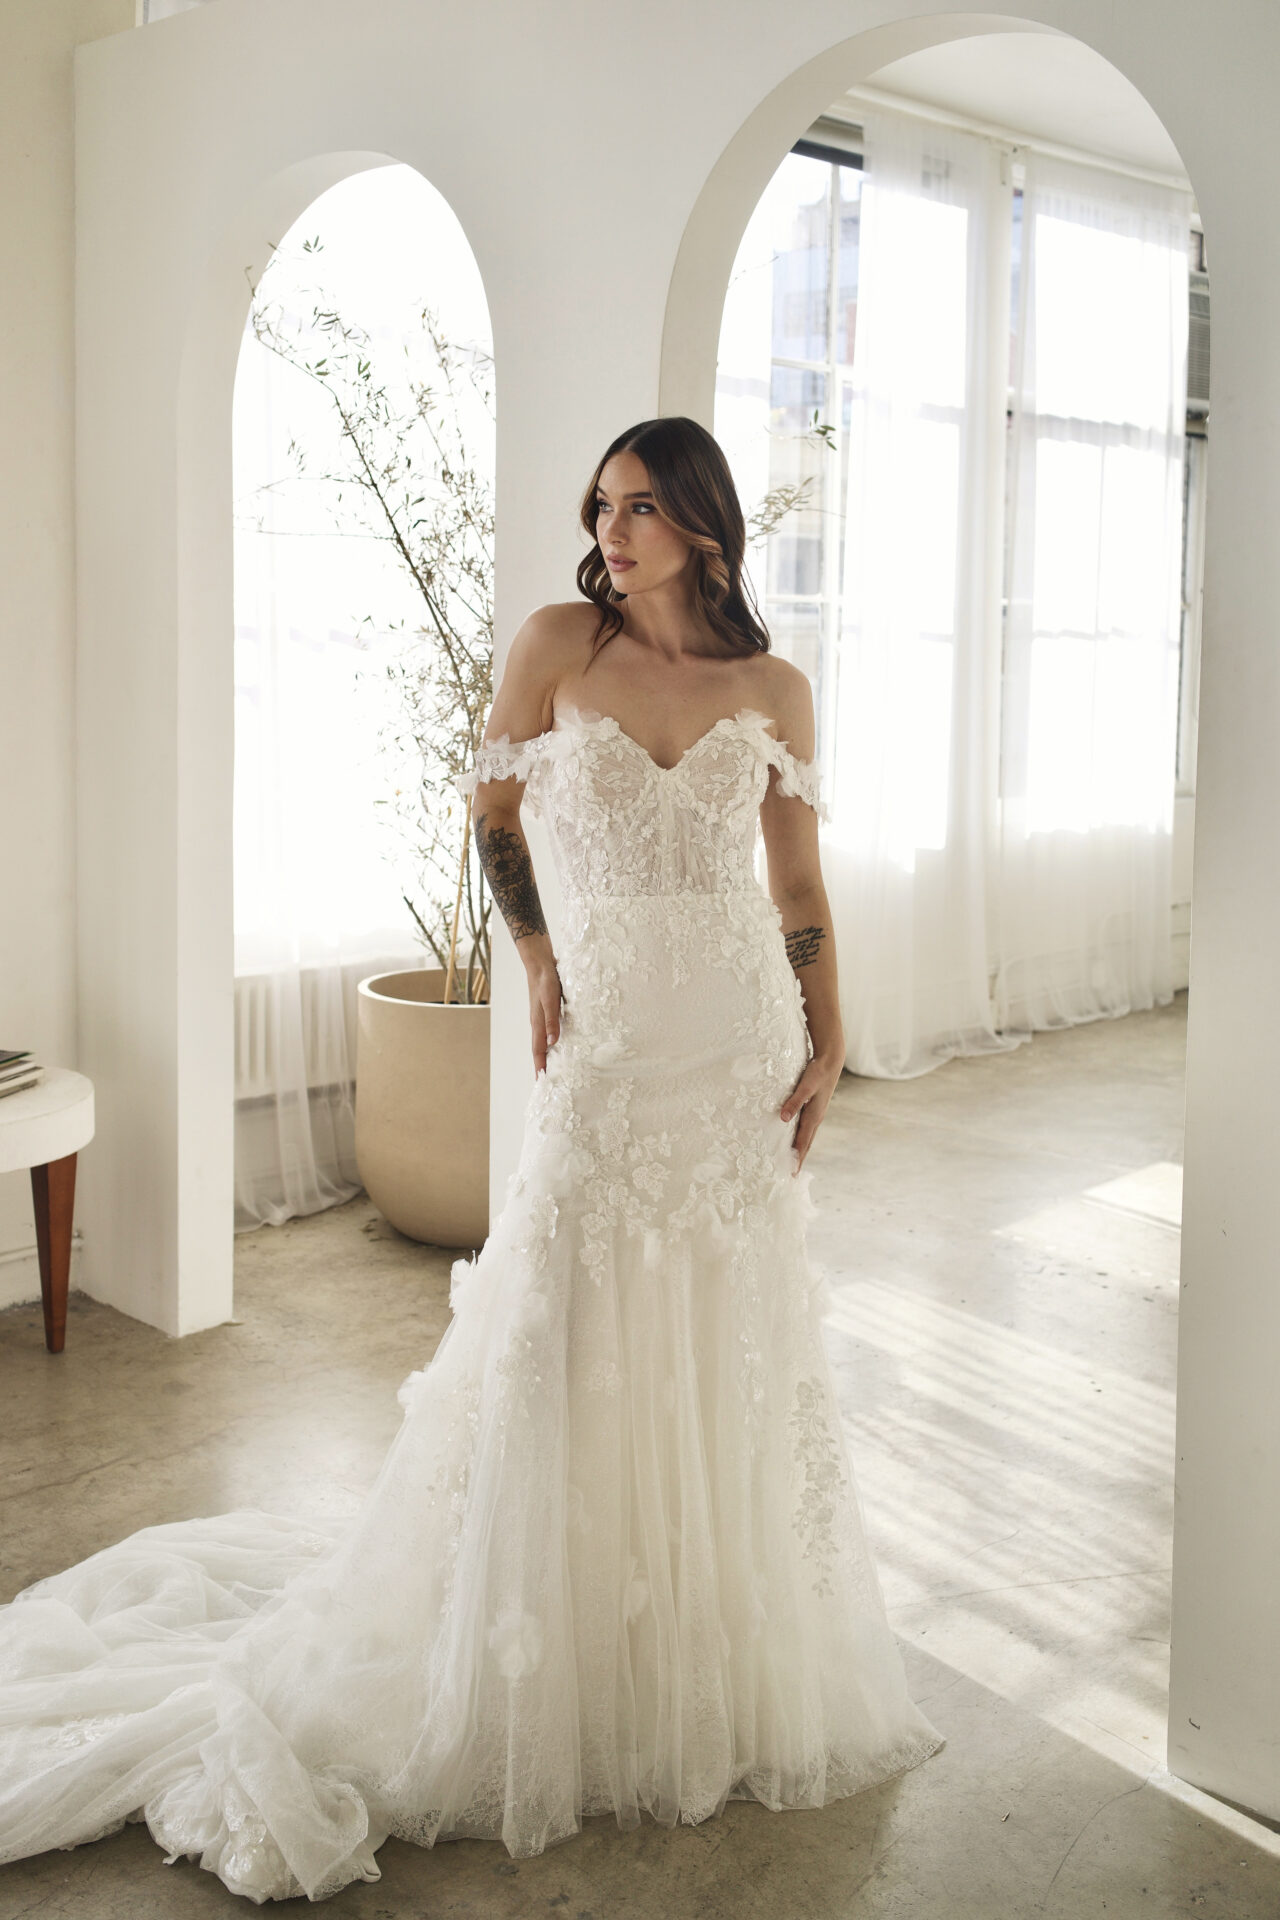 Shimmering Lace Wedding Dress with Strappy Back - Martina Liana